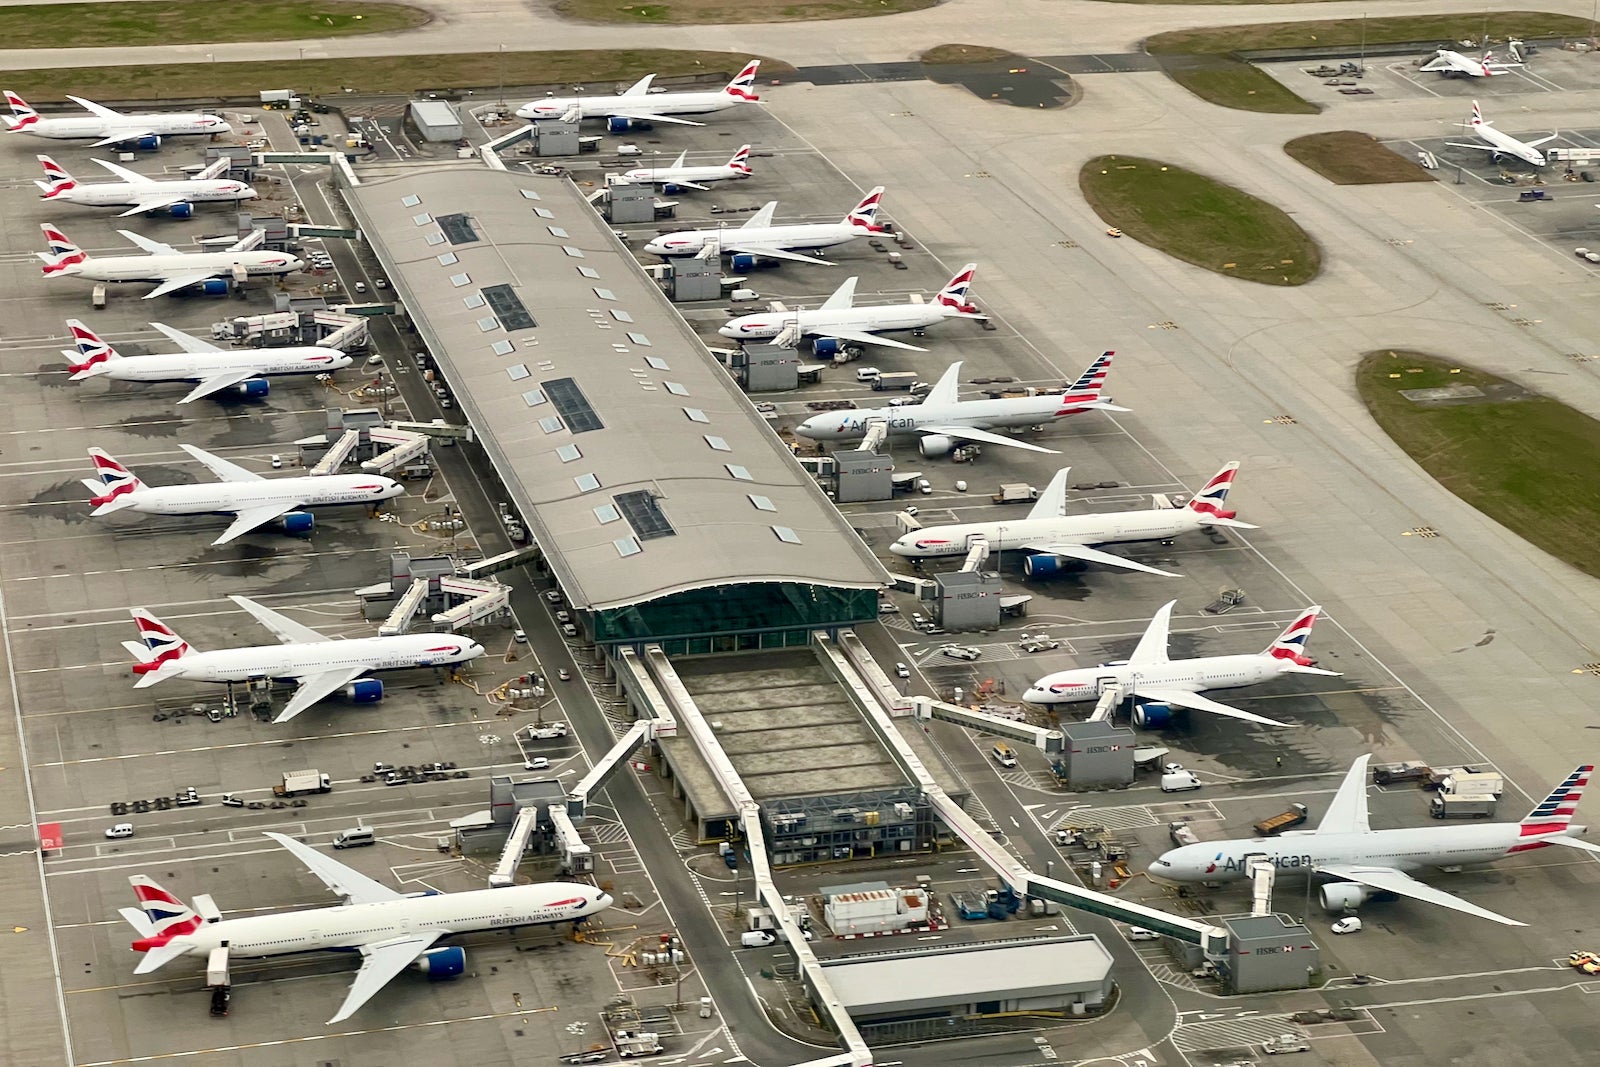 London Heathrow Airport Raising Passenger Charge - One Mile at a Time